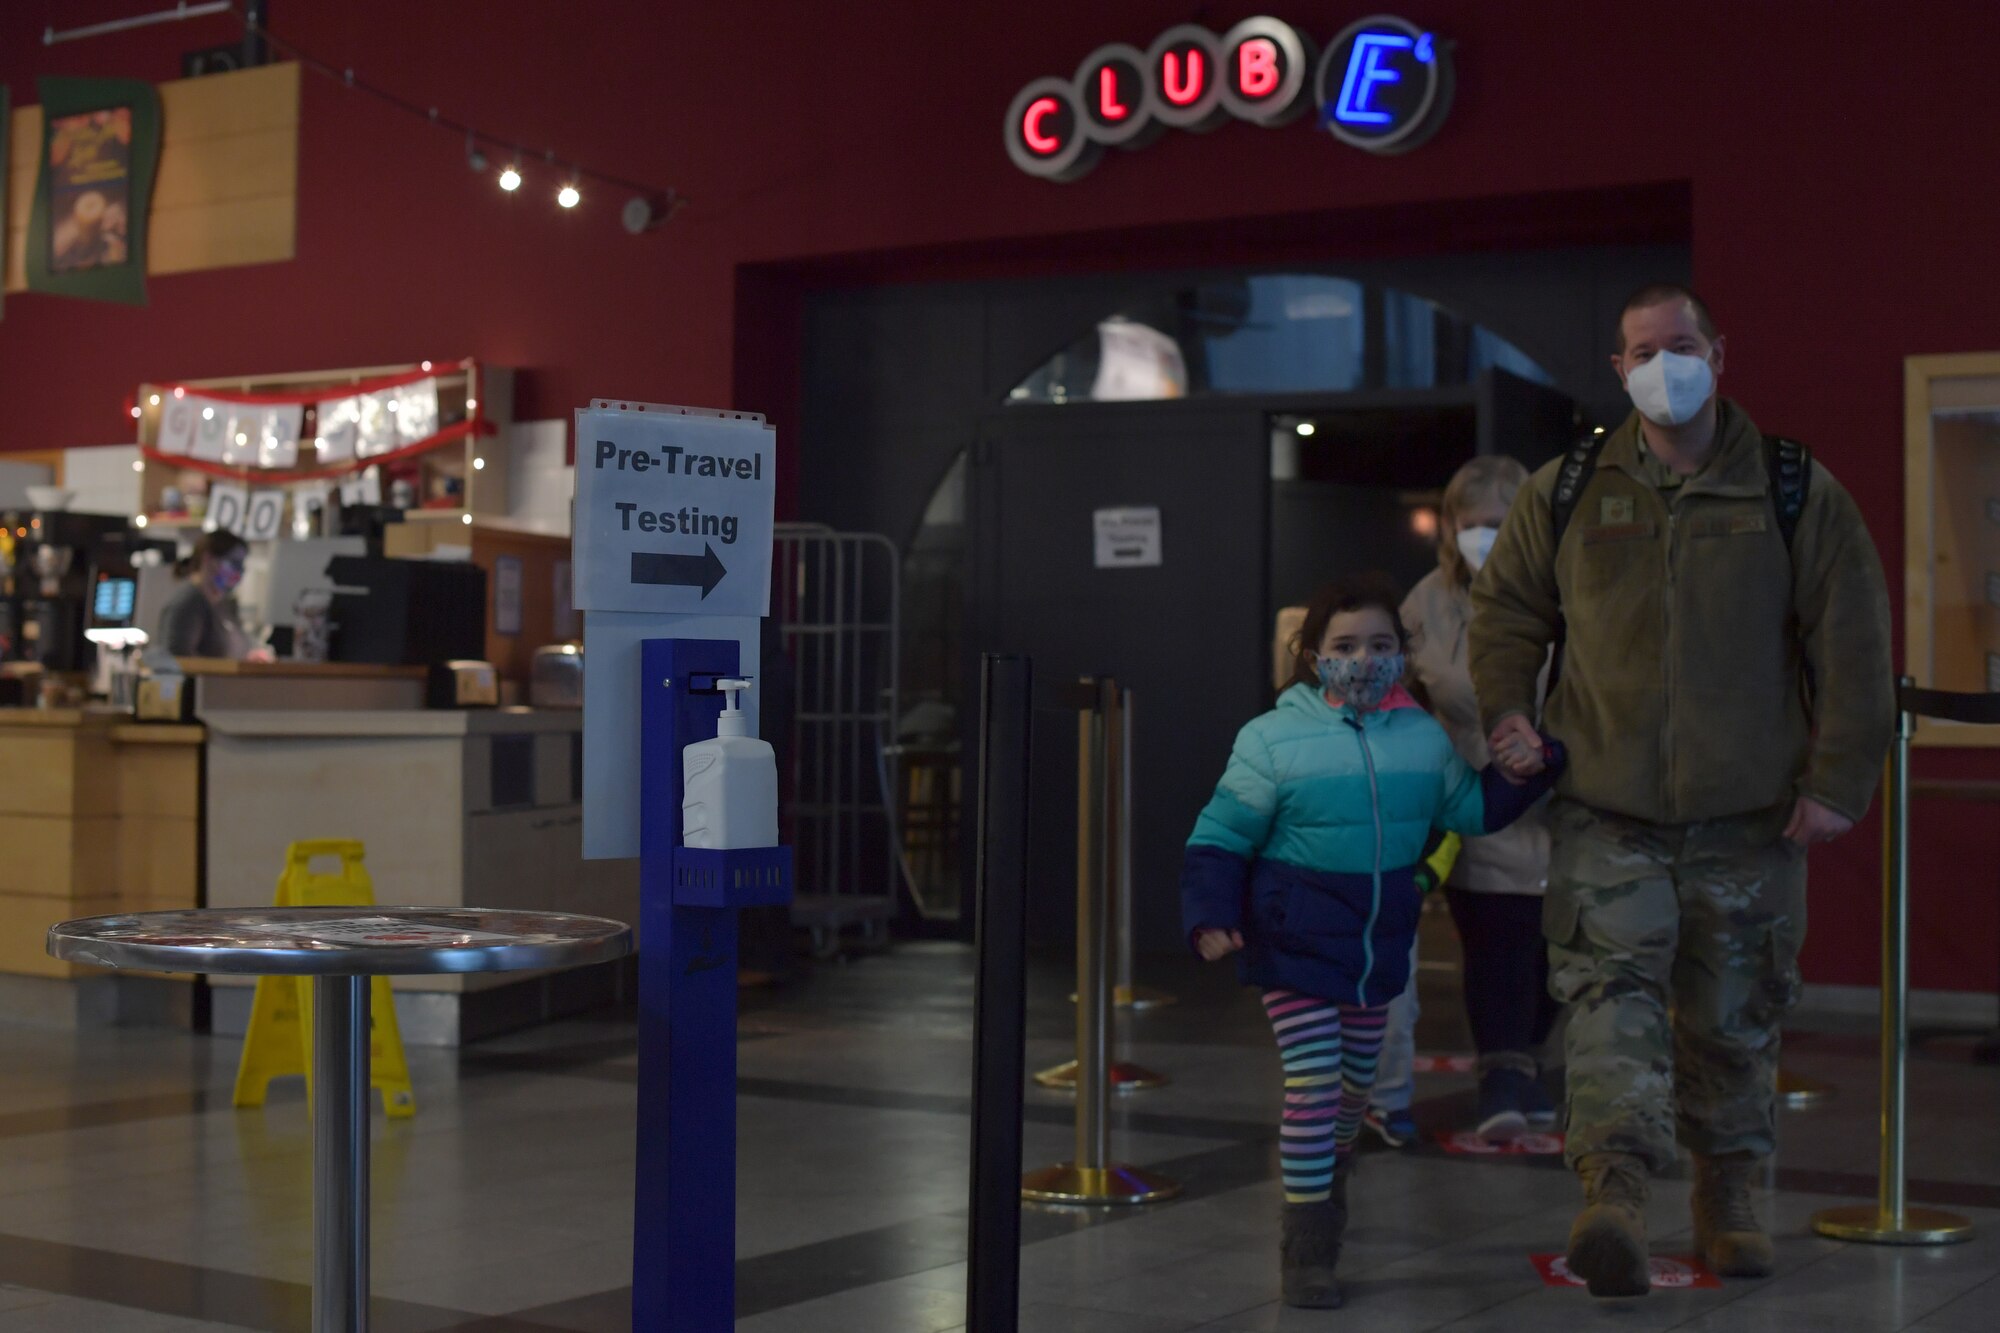 U.S. Air Force Senior Master Sgt. Jacob Schuhardt, 86th Airlift Wing safety superintendent, leaves the Enlisted Club with his daughter, Elyse Schuhardt, and the rest of his family, after pre-travel COVID-19 testing on Ramstein Air Base, Germany, Jan. 28, 2021.